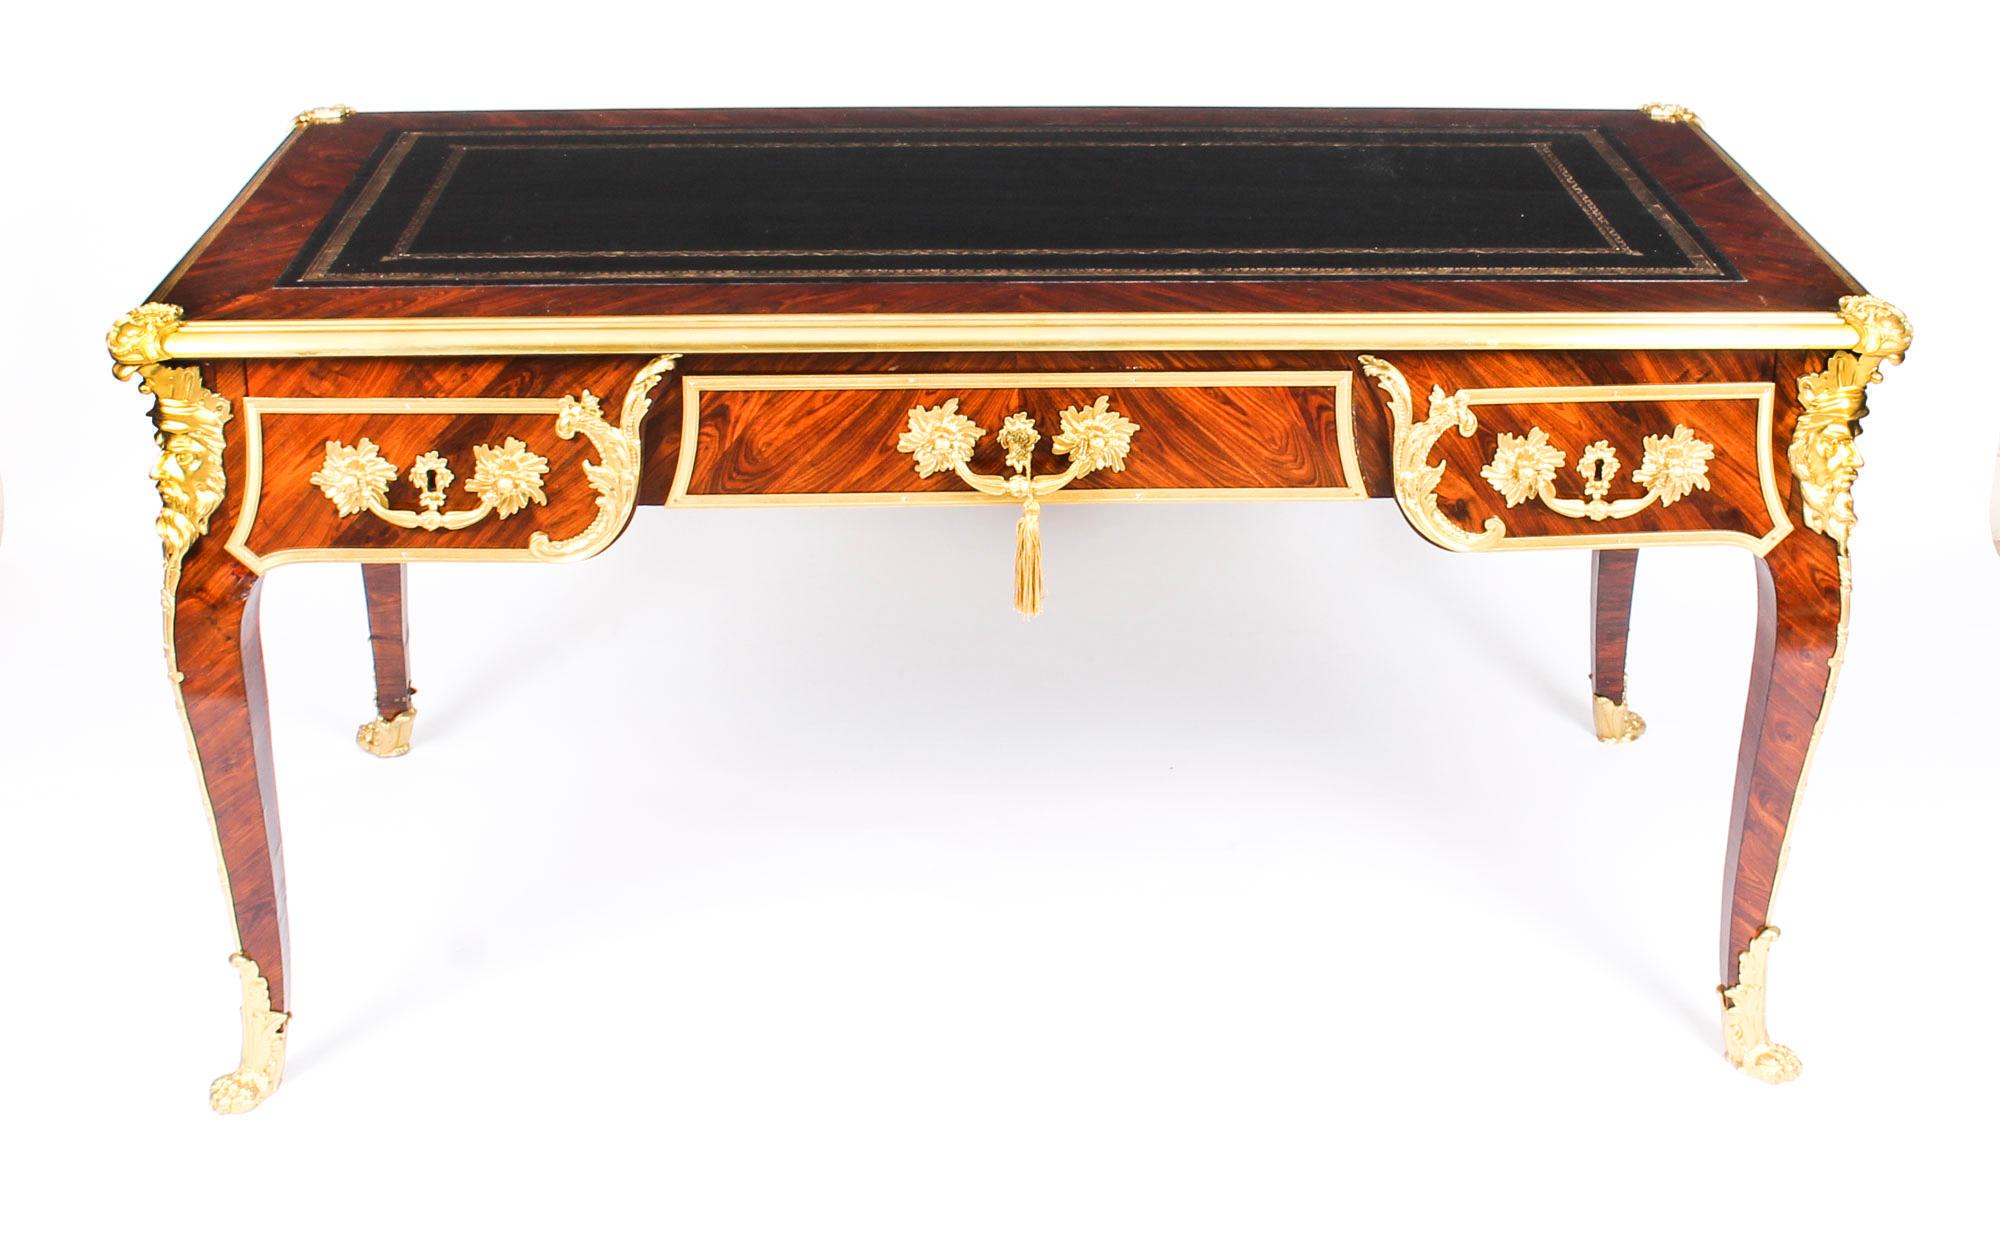 This is a gorgeous antique French Louis Revival gilt bronze mounted kingwood bureau plat, circa 1860 in date.

The shaped top has a decorative gilt bronze border, raised corner cartouches and an inset gold tooled black leather writing surface, above